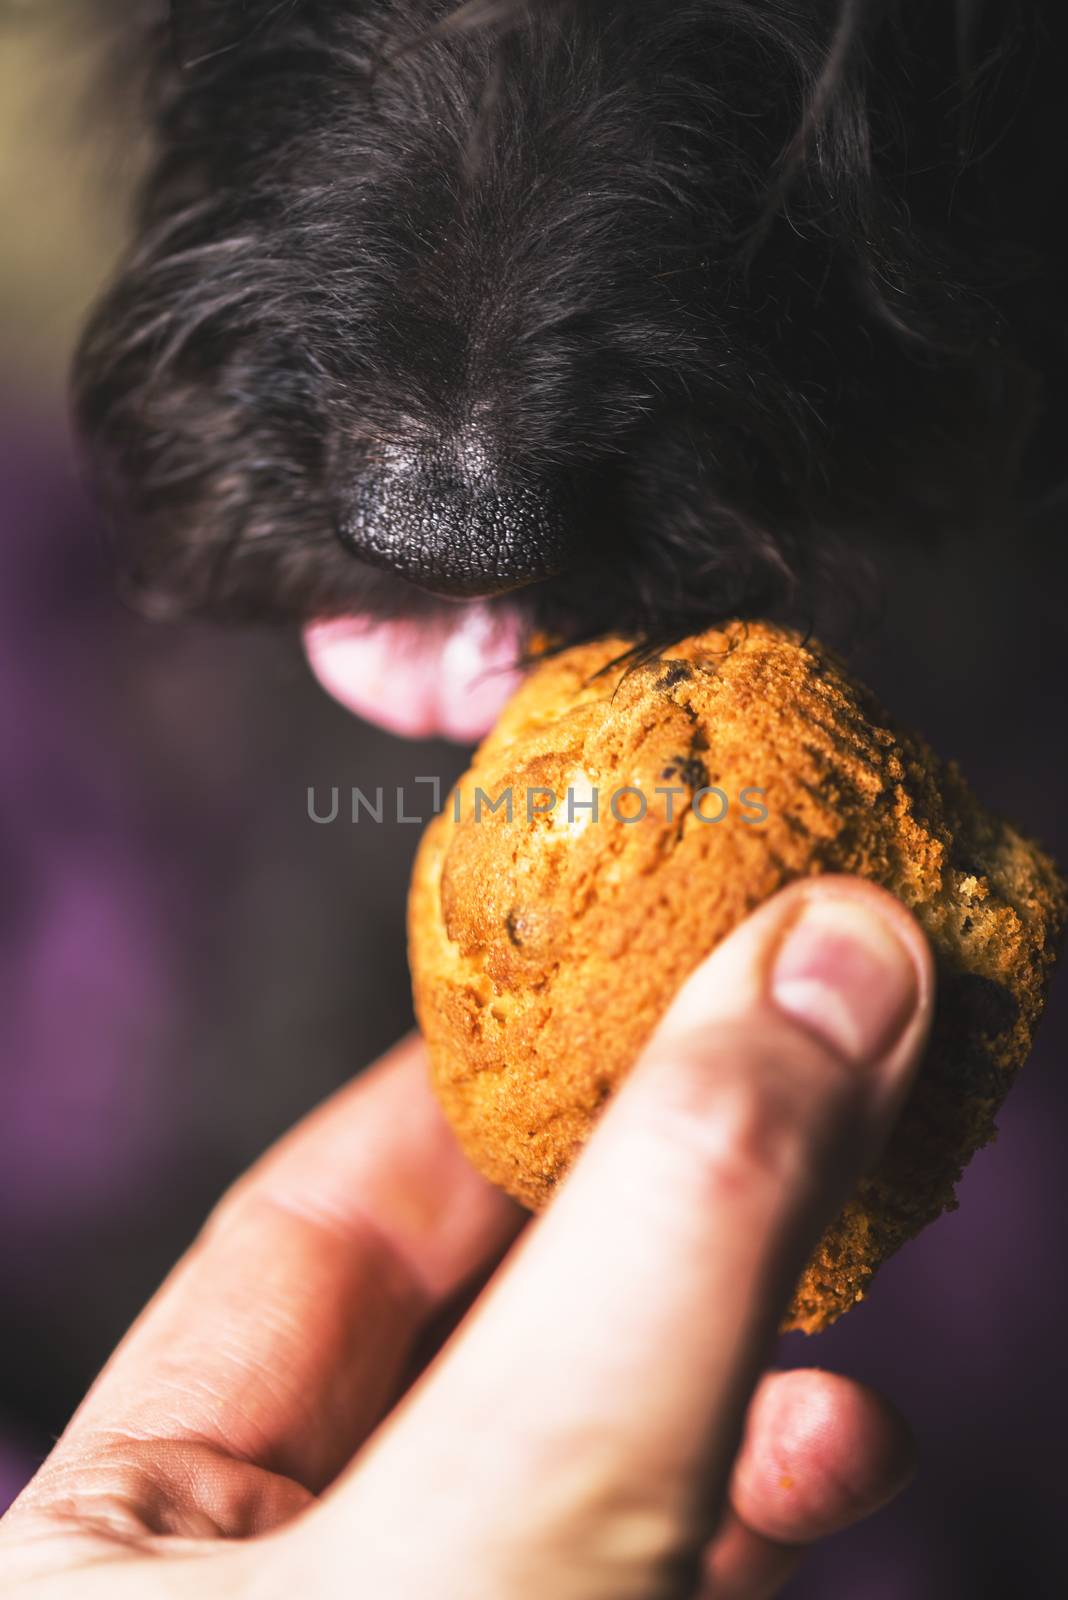 a black dog taking a snack as reward from a man's hand. by verbano